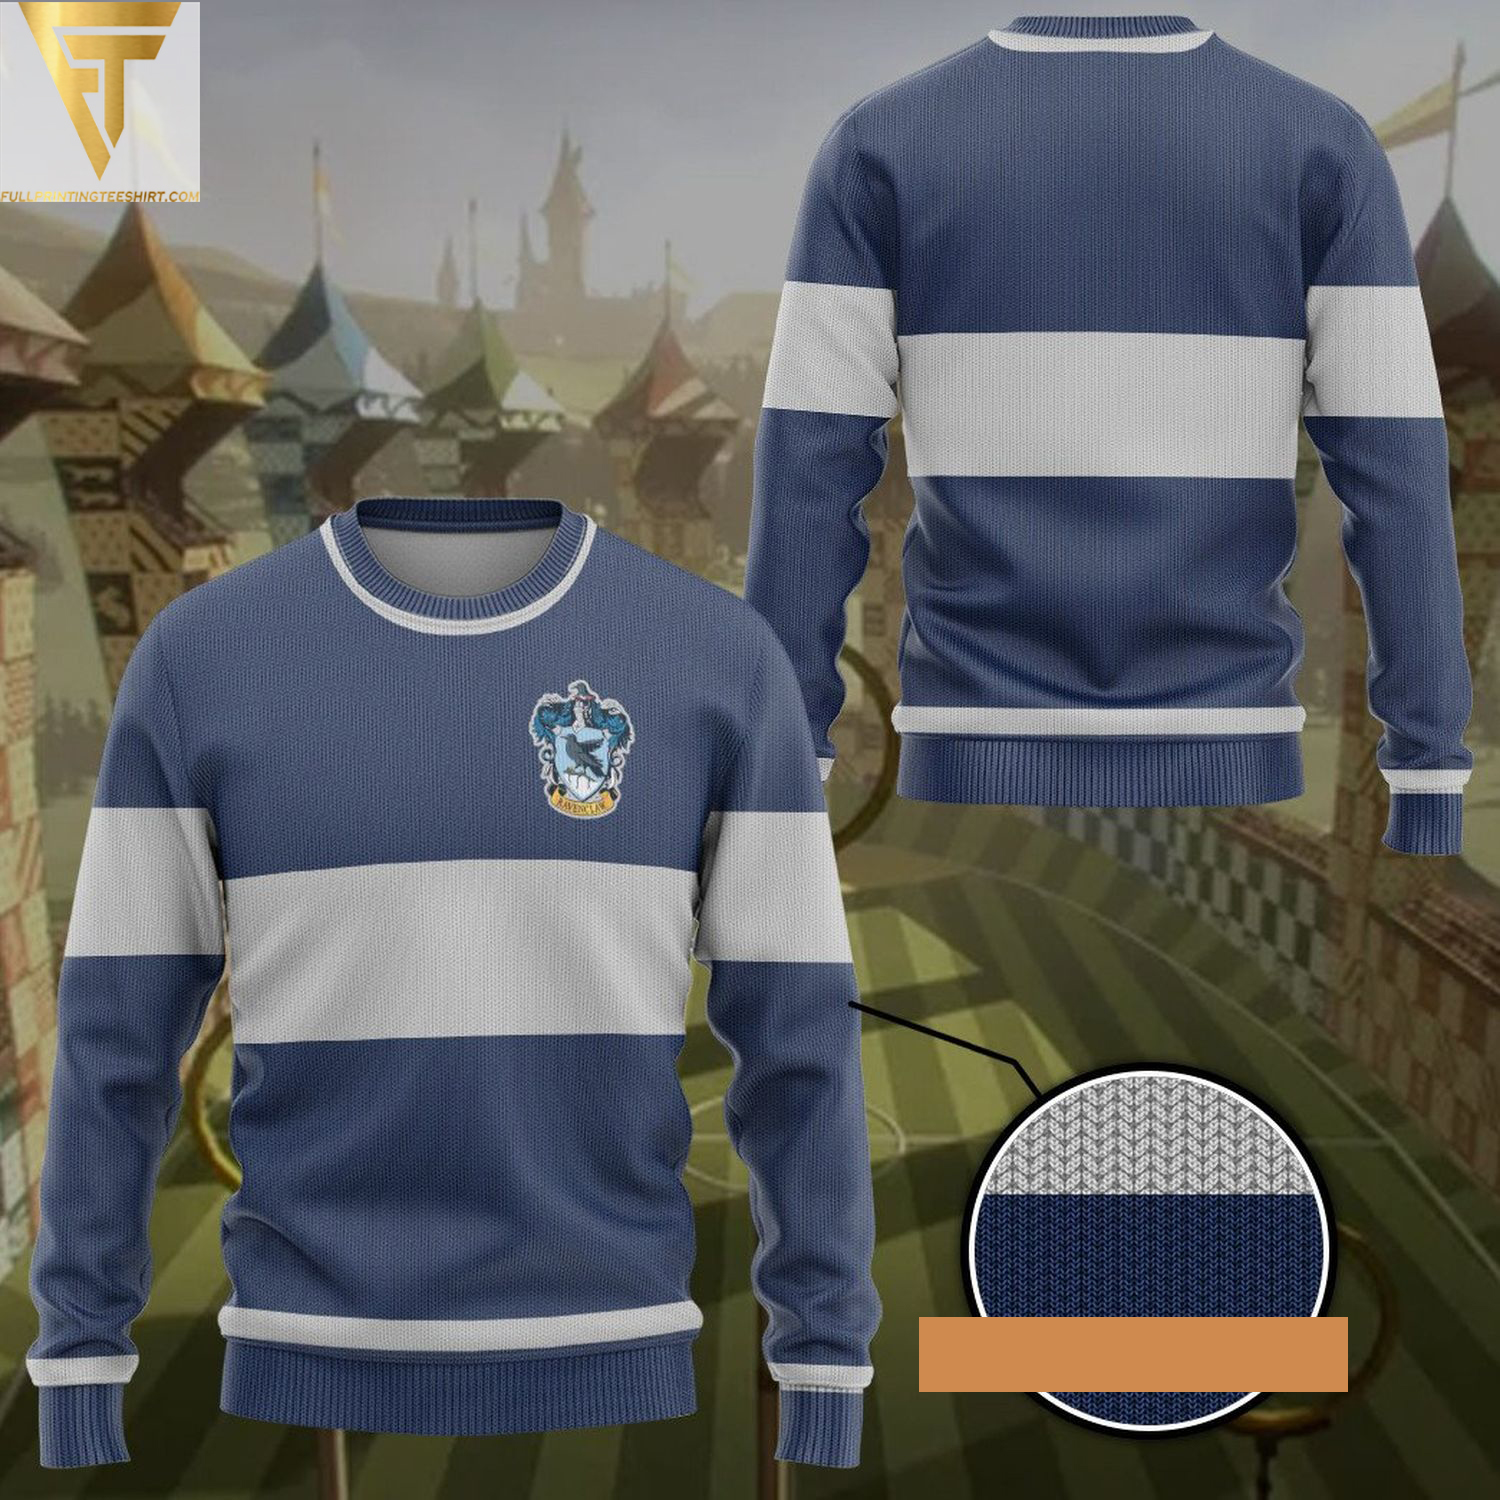 Harry potter ravenclaw quidditch ugly christmas sweater - Copy (2)